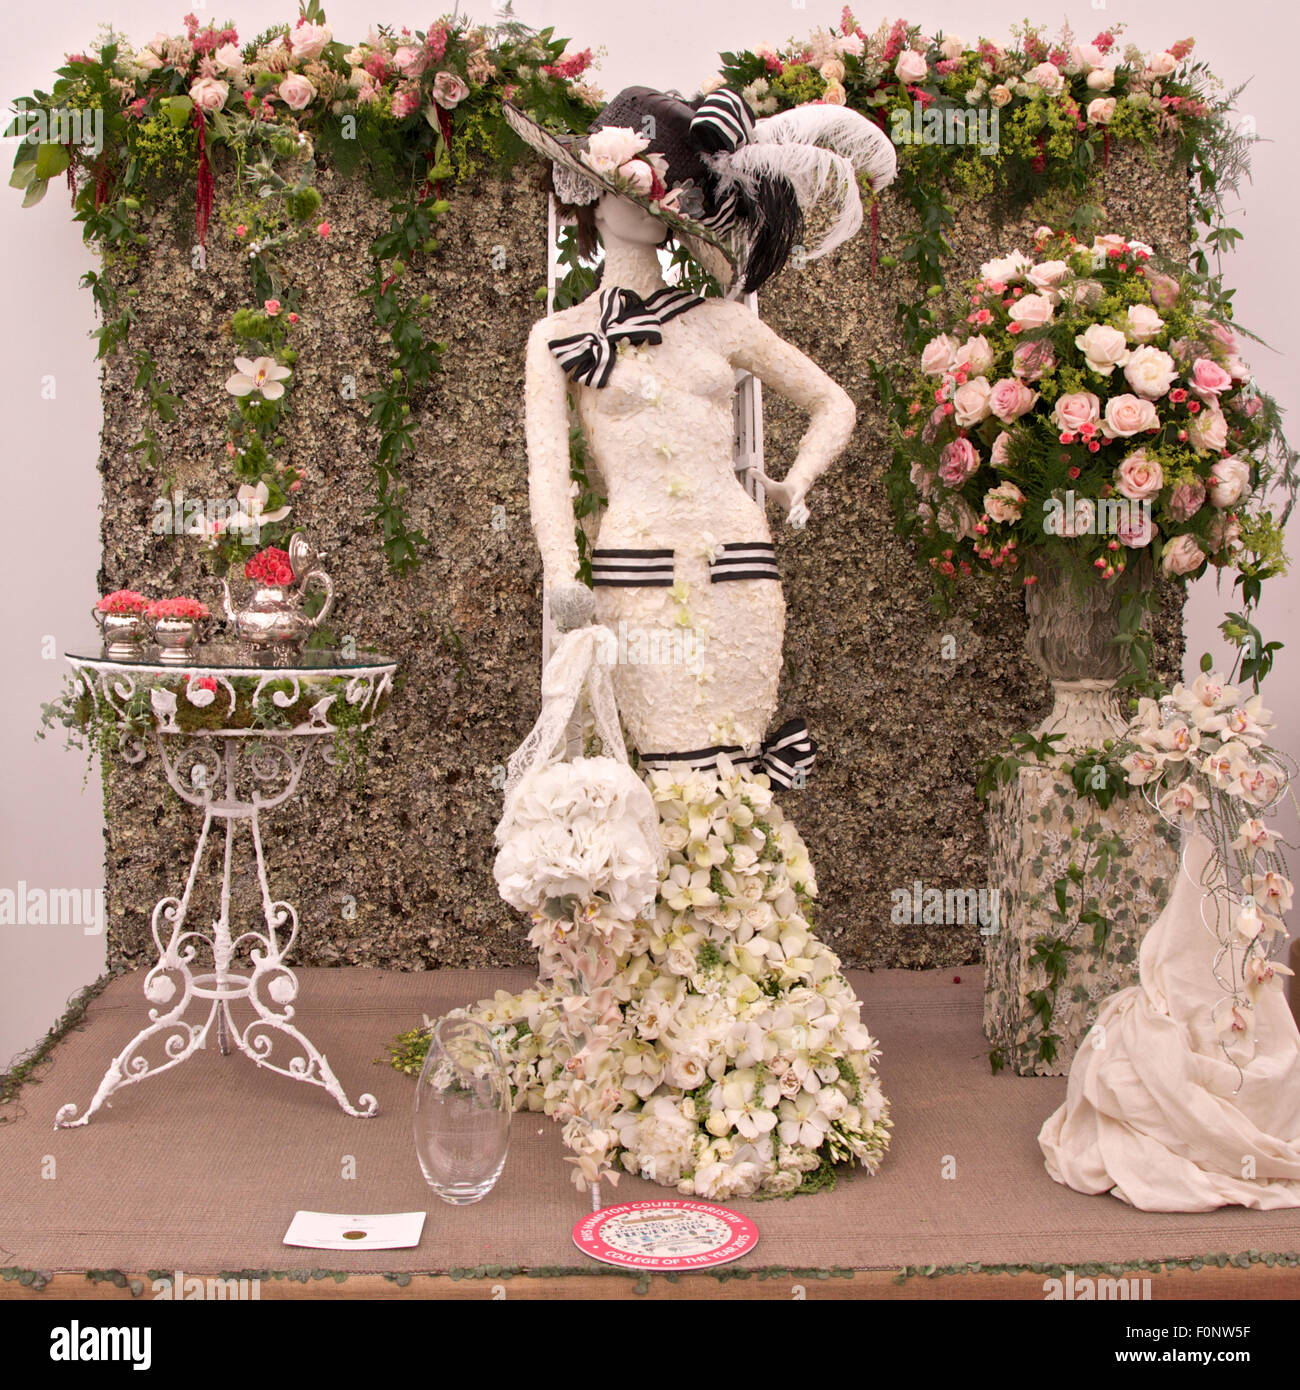 My Fair Lady floristry display by City of Bath College at RHS Hampton Court Palace Flower Show 2015 Stock Photo